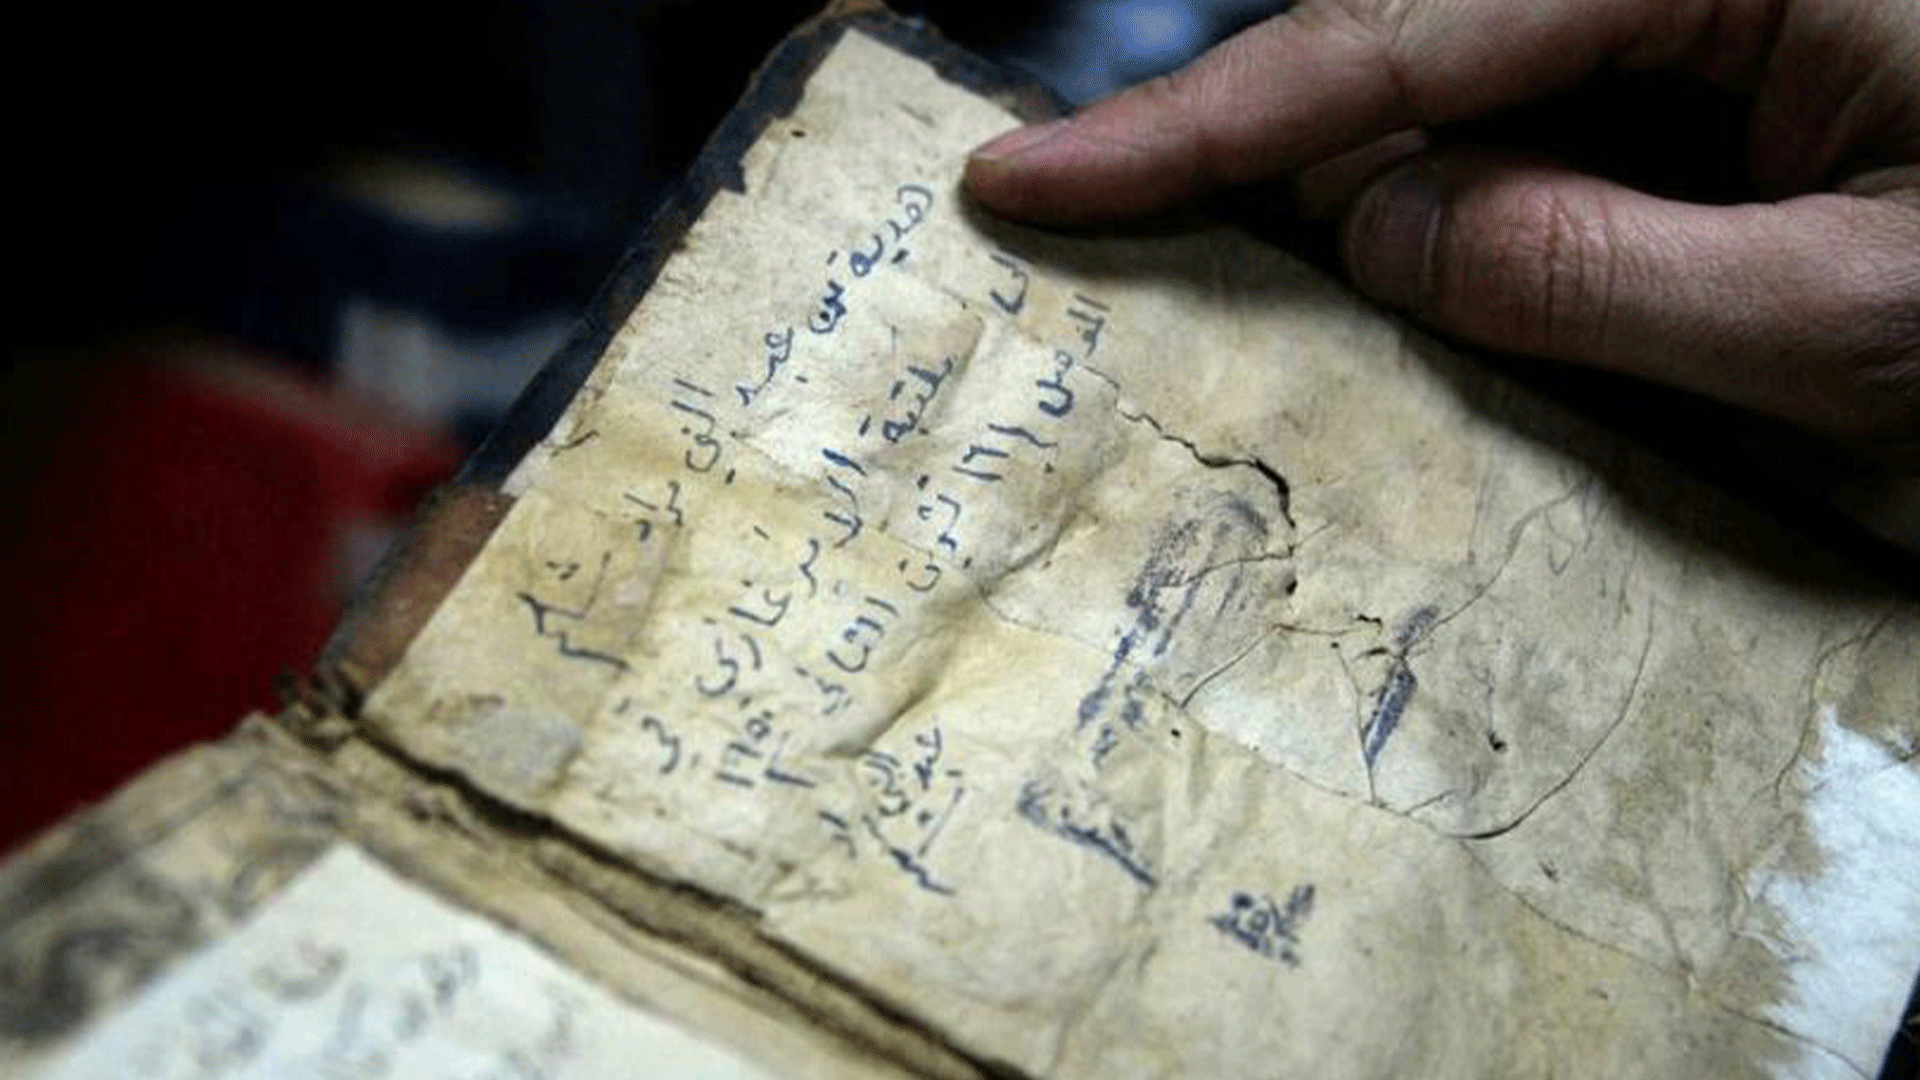  A librarian shows a book from University of Iraq's northern city of Mosul, one of those that escaped destruction at the hands of the ISIS group Zaid AL-OBEIDI AFP